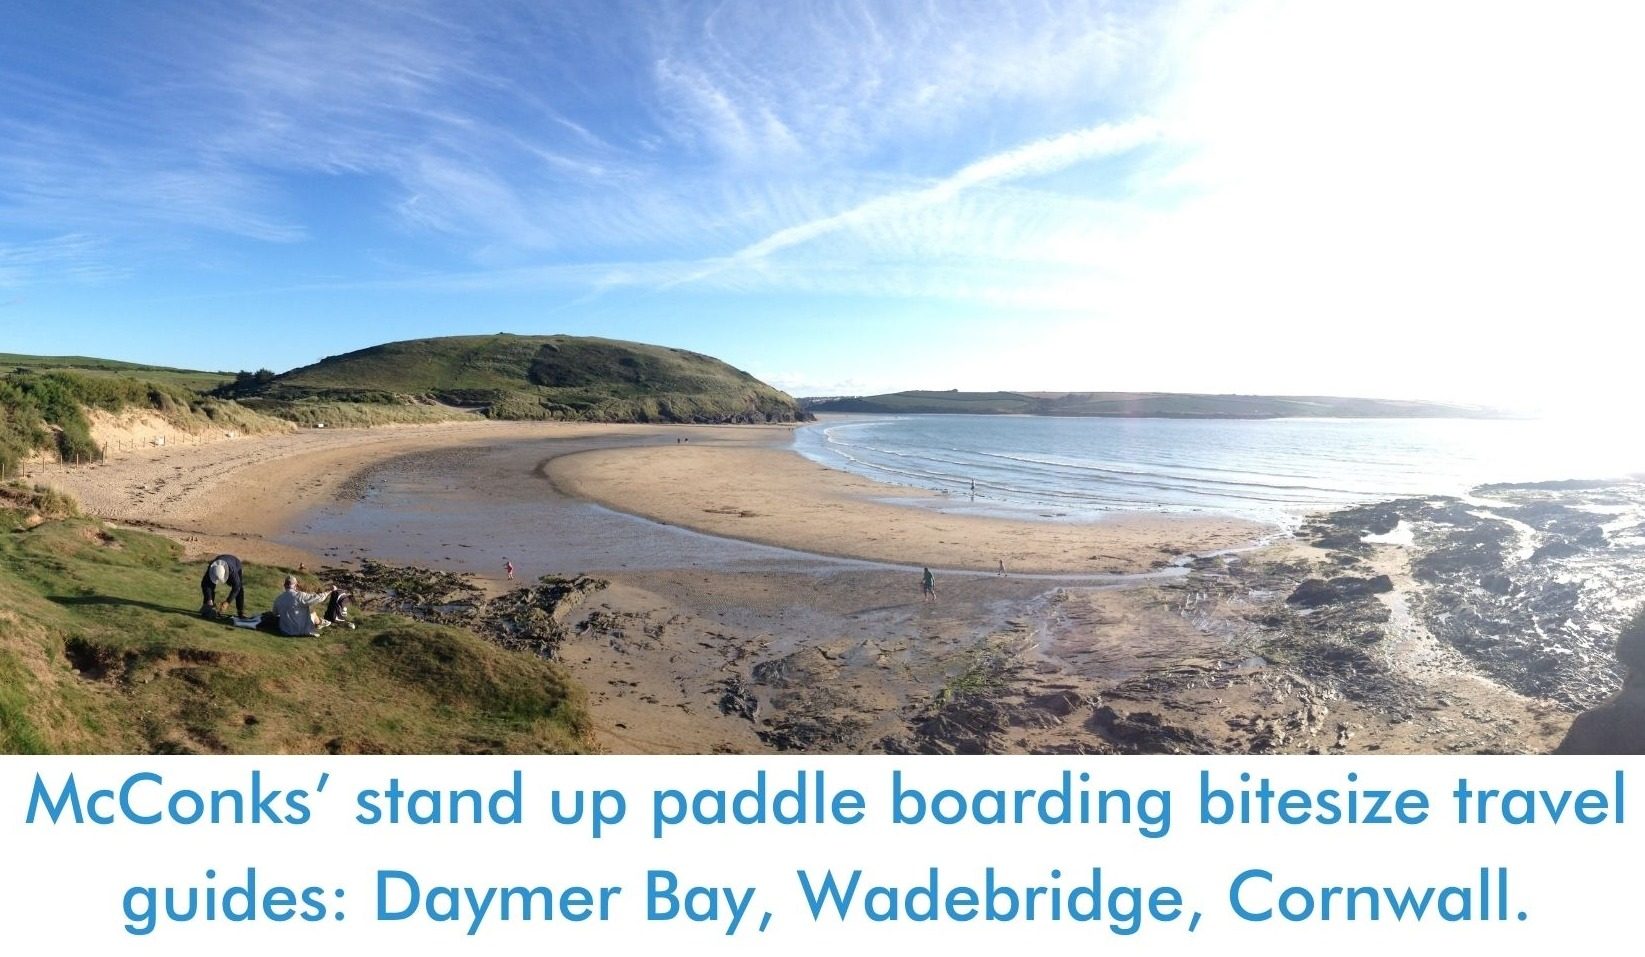 You are currently viewing McConks’ stand up paddle boarding bitesize travel guides: Daymer Bay, Wadebridge, Cornwall.